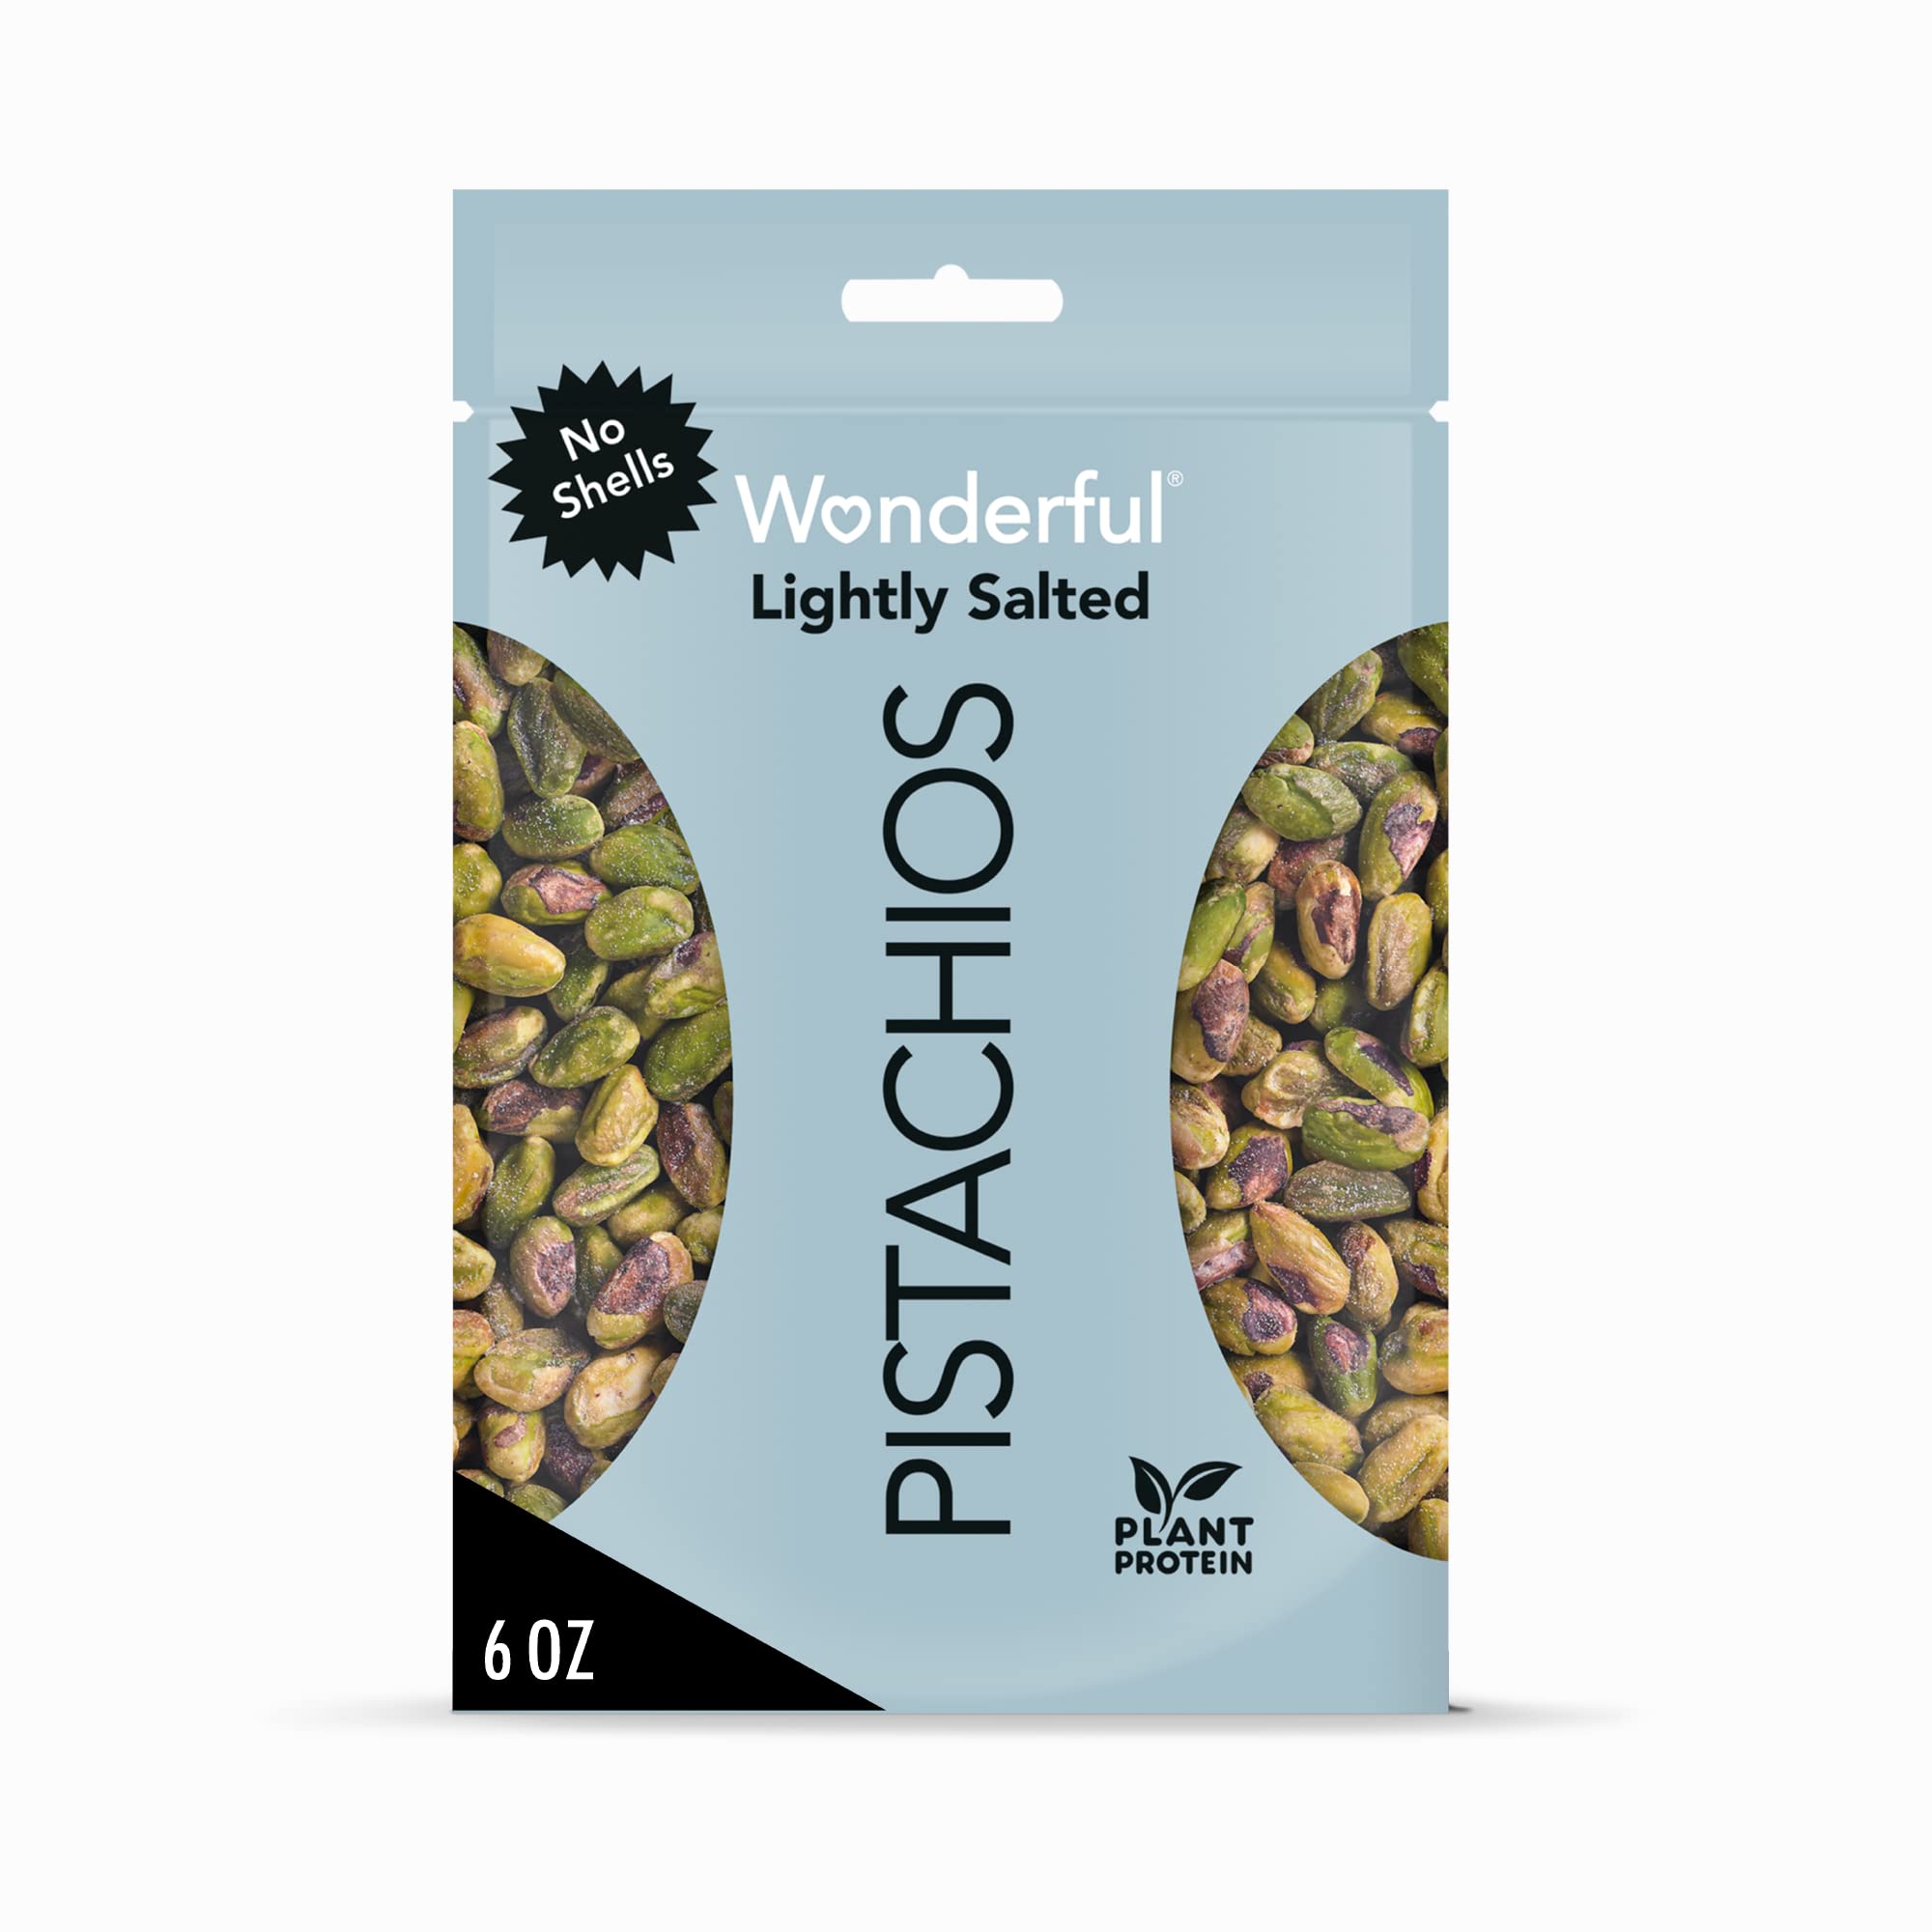 6-Oz Wonderful Pistachios (Lightly Salted, No Shells) $3.70 w/ S&S and More + Free Shipping w/ Prime or on $25+